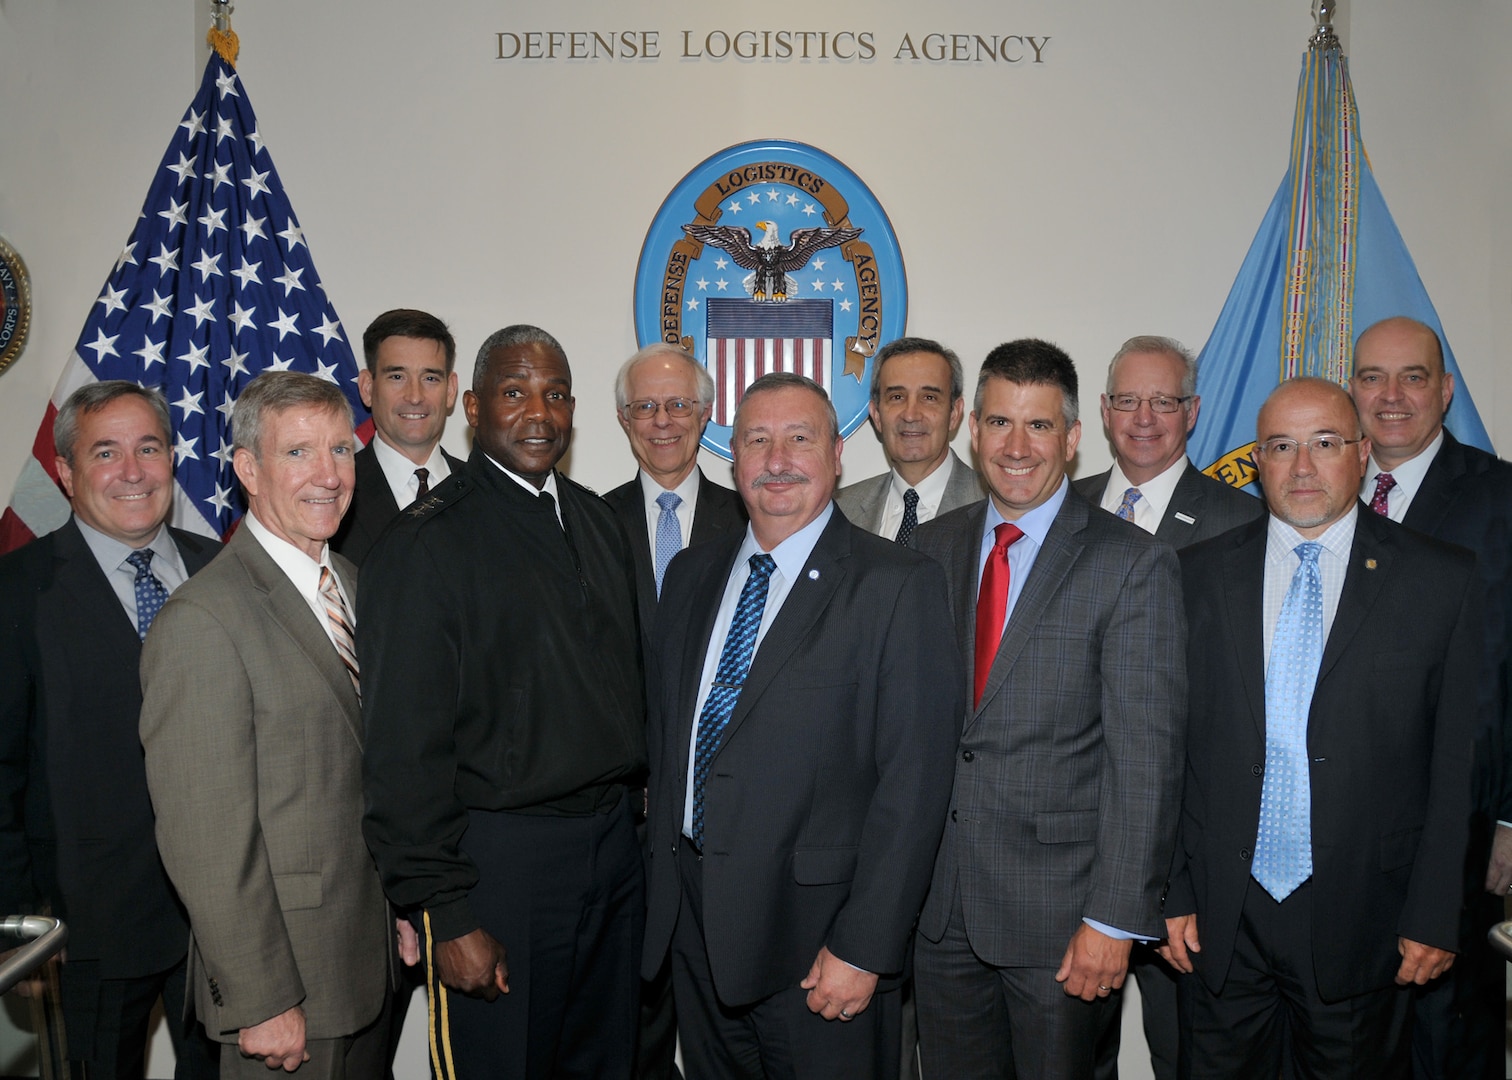 Group of industry leaders and DLA leaders pose before event.